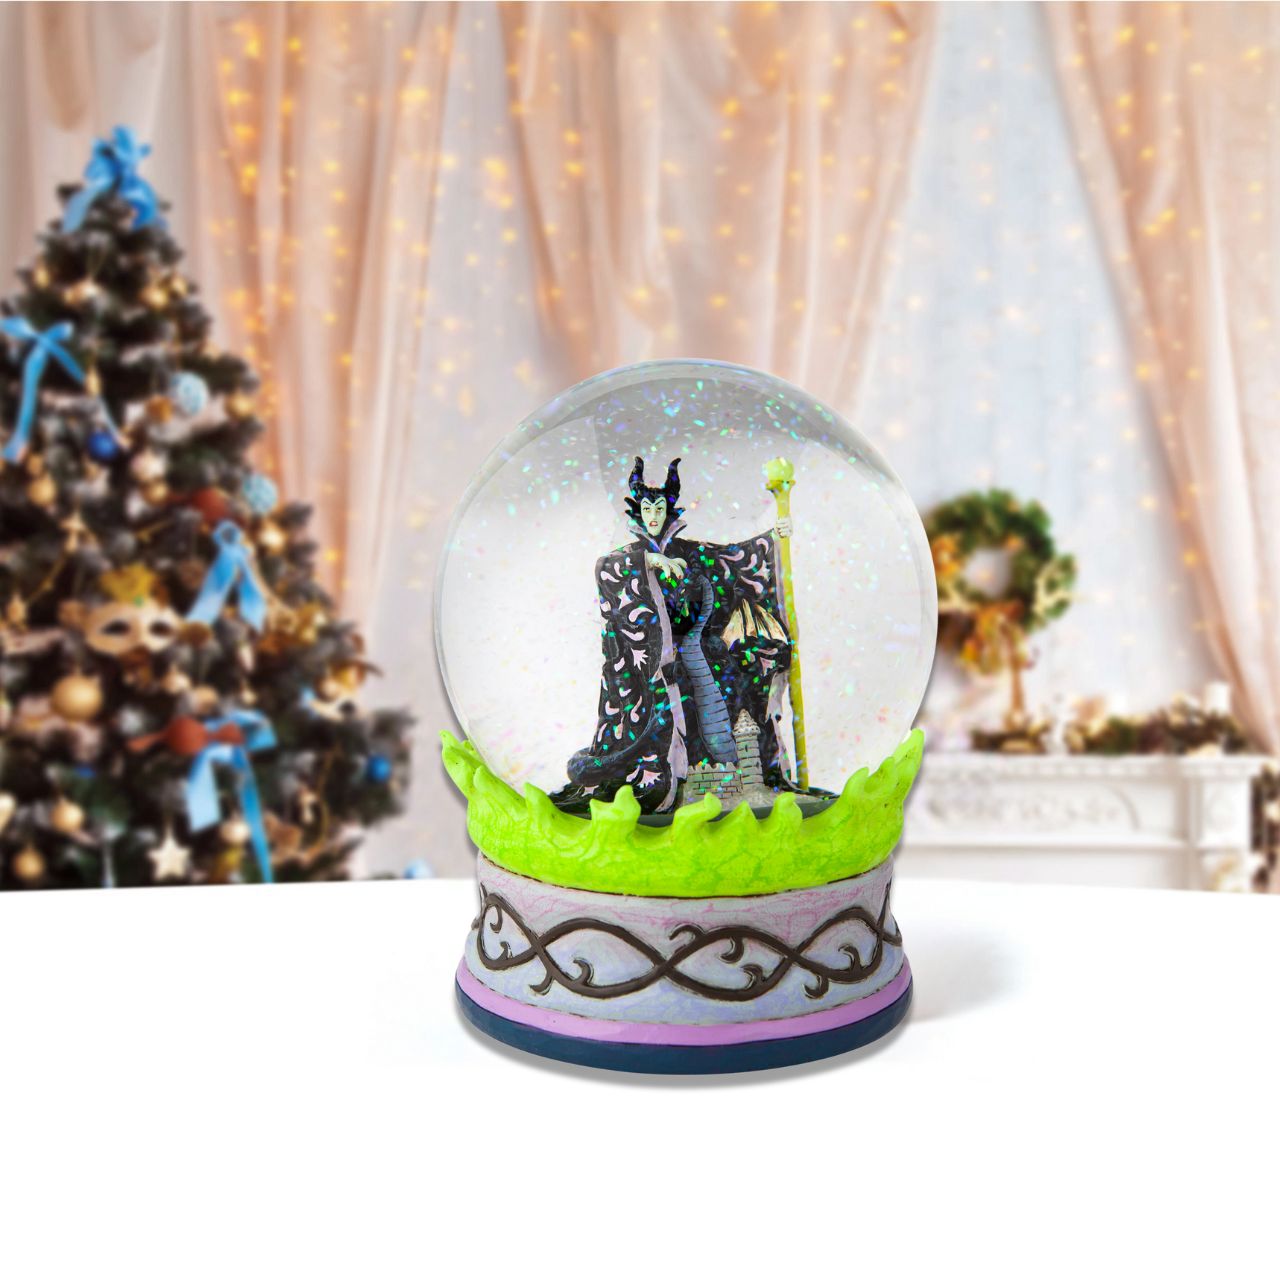 Disney's Sleeping Beauty Maleficent  Christmas Snow Globe  This waterball is almost caldron-like with it's eerie green flames and evil centerpiece. Maleficent, the bitter witch of Disney's Sleeping Beauty, strikes a dubious pose in the water. With immaculate craftsmanship this Jim Shore piece astonishes.